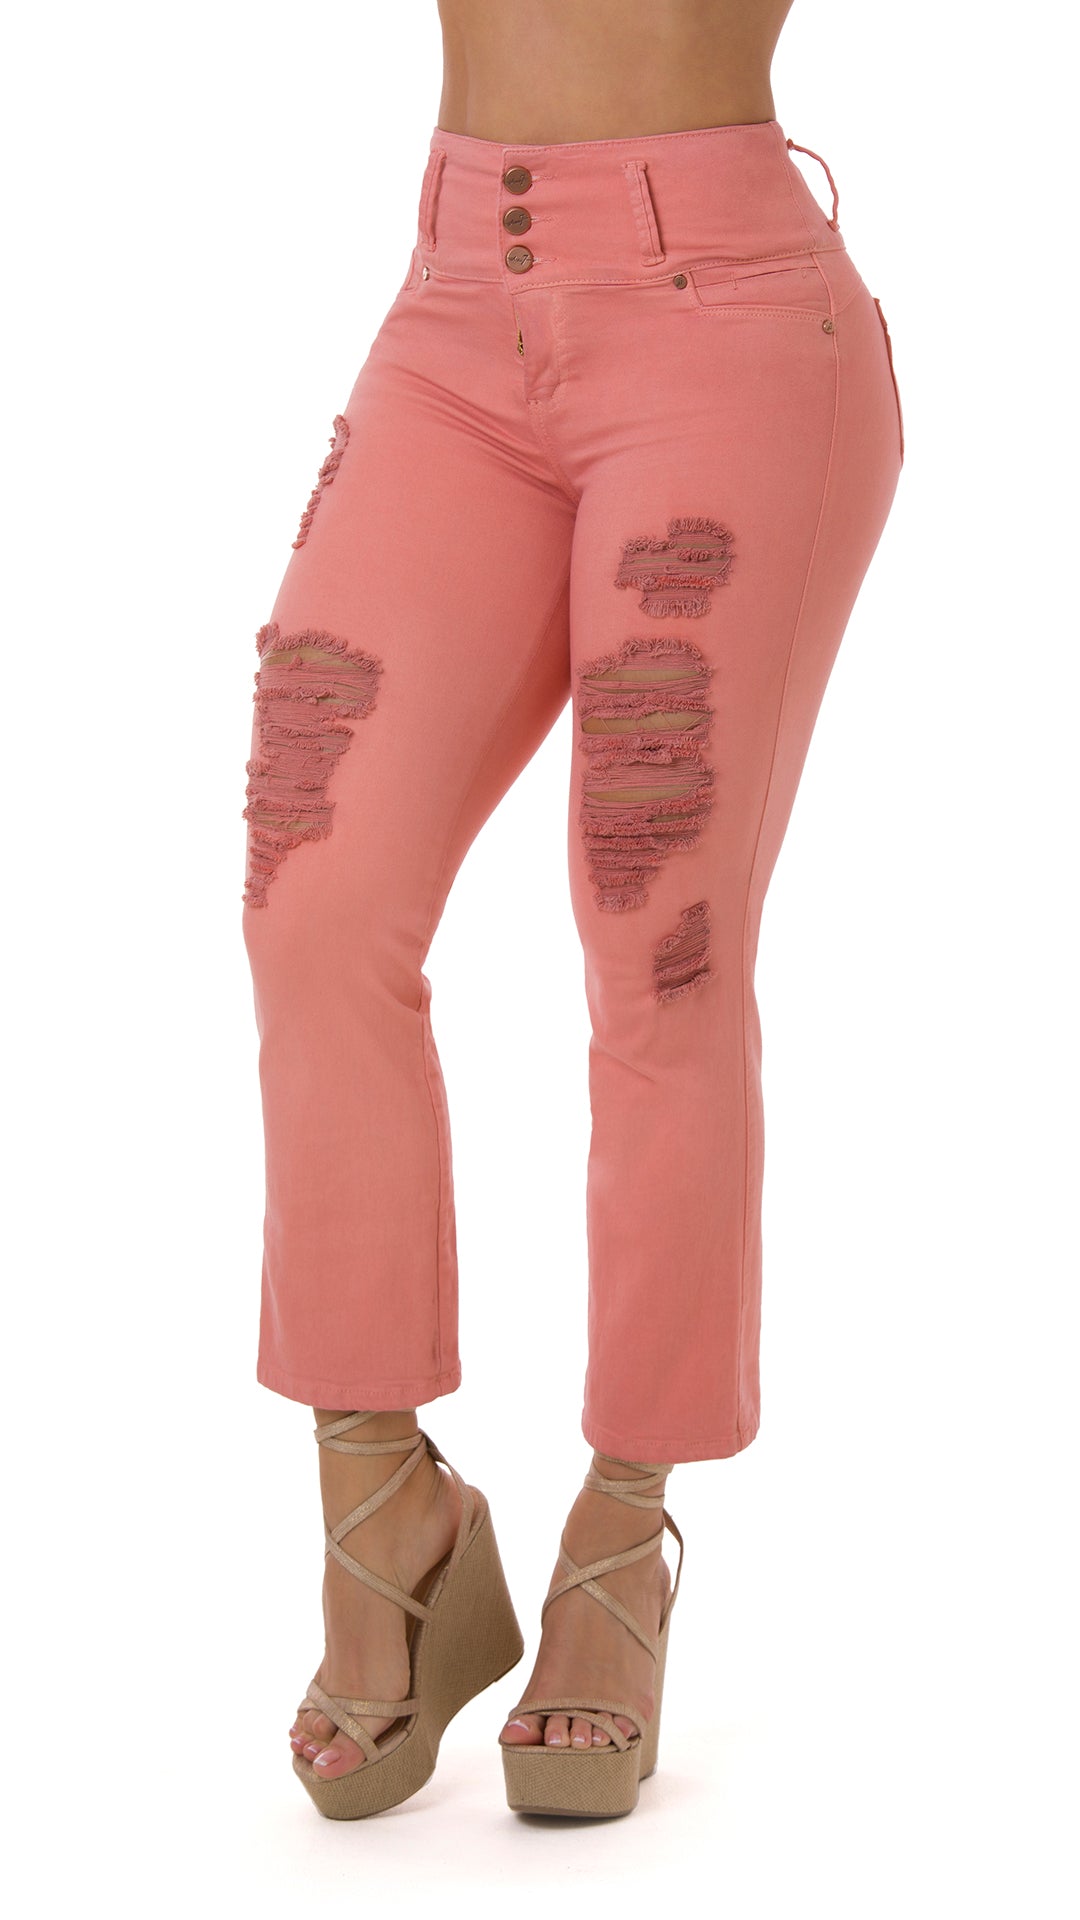 Women's Pink High-Waisted Jeans